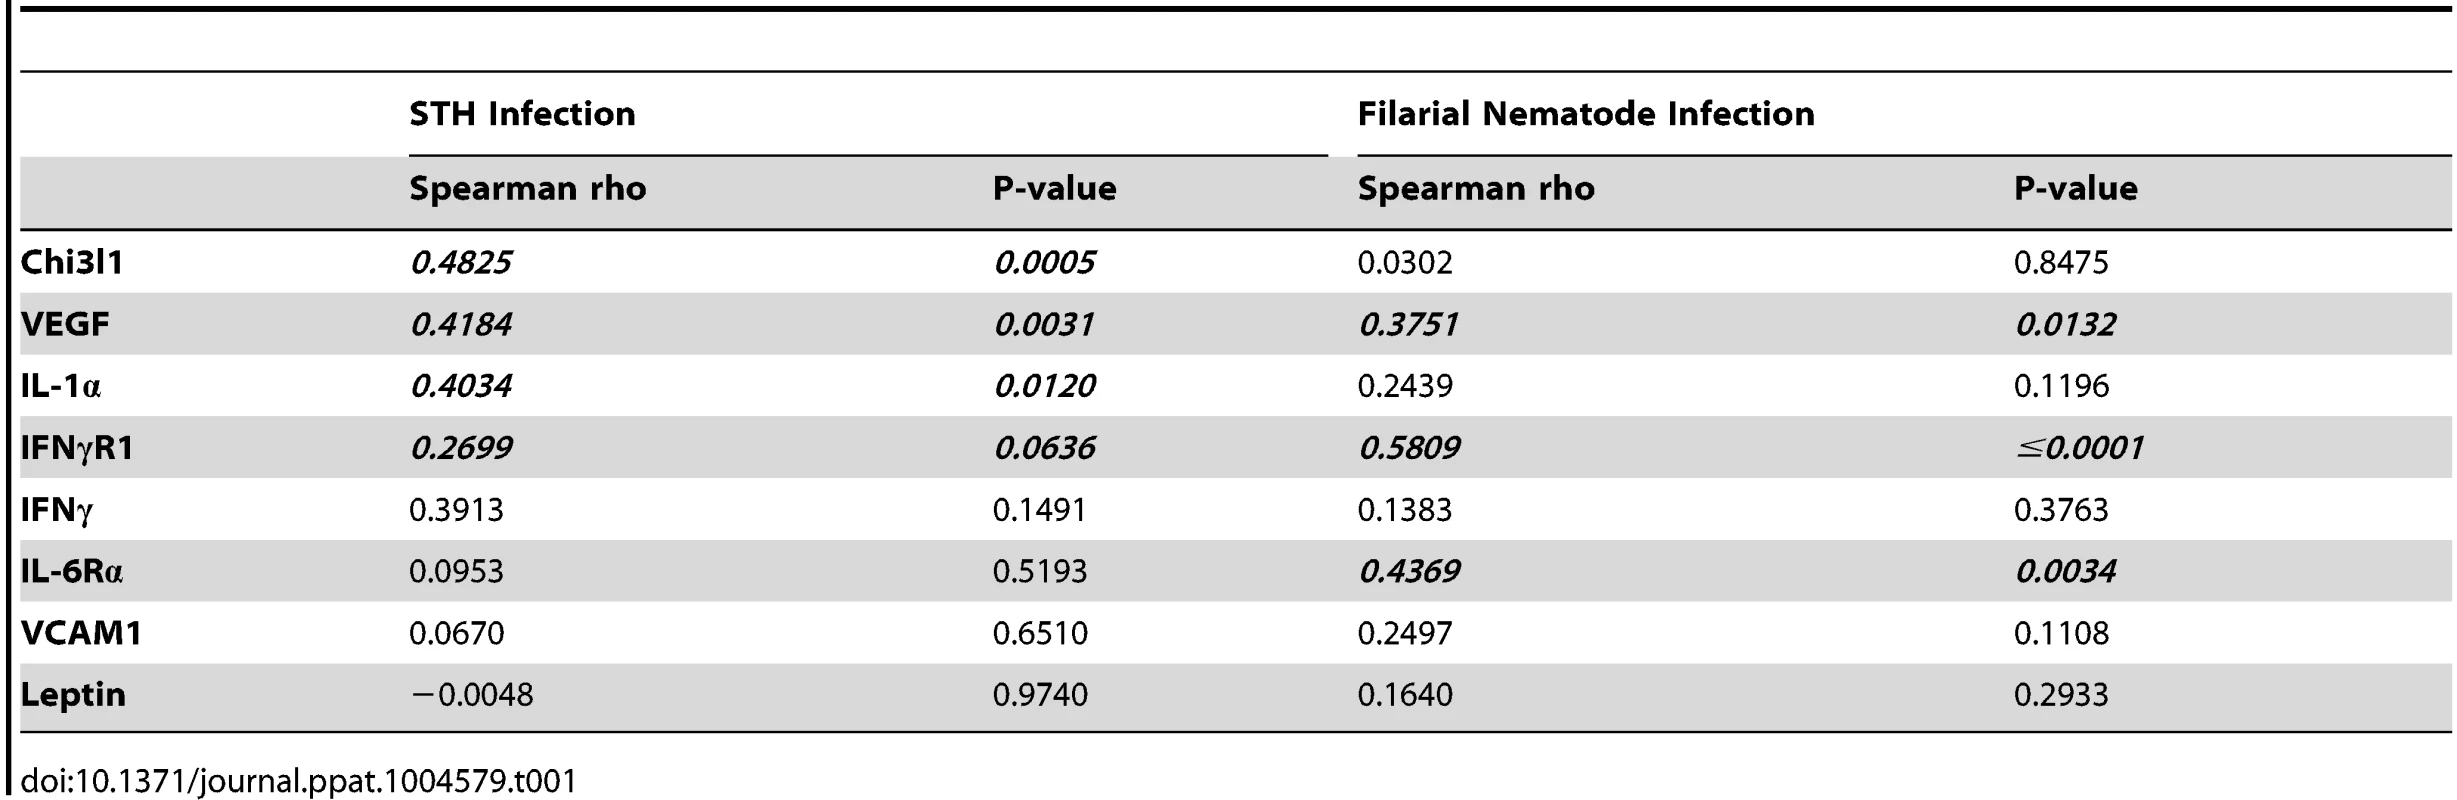 Many inflammatory factors are positively correlated with resistin in humans infected with soil-transmitted helminths or filarial nematodes.